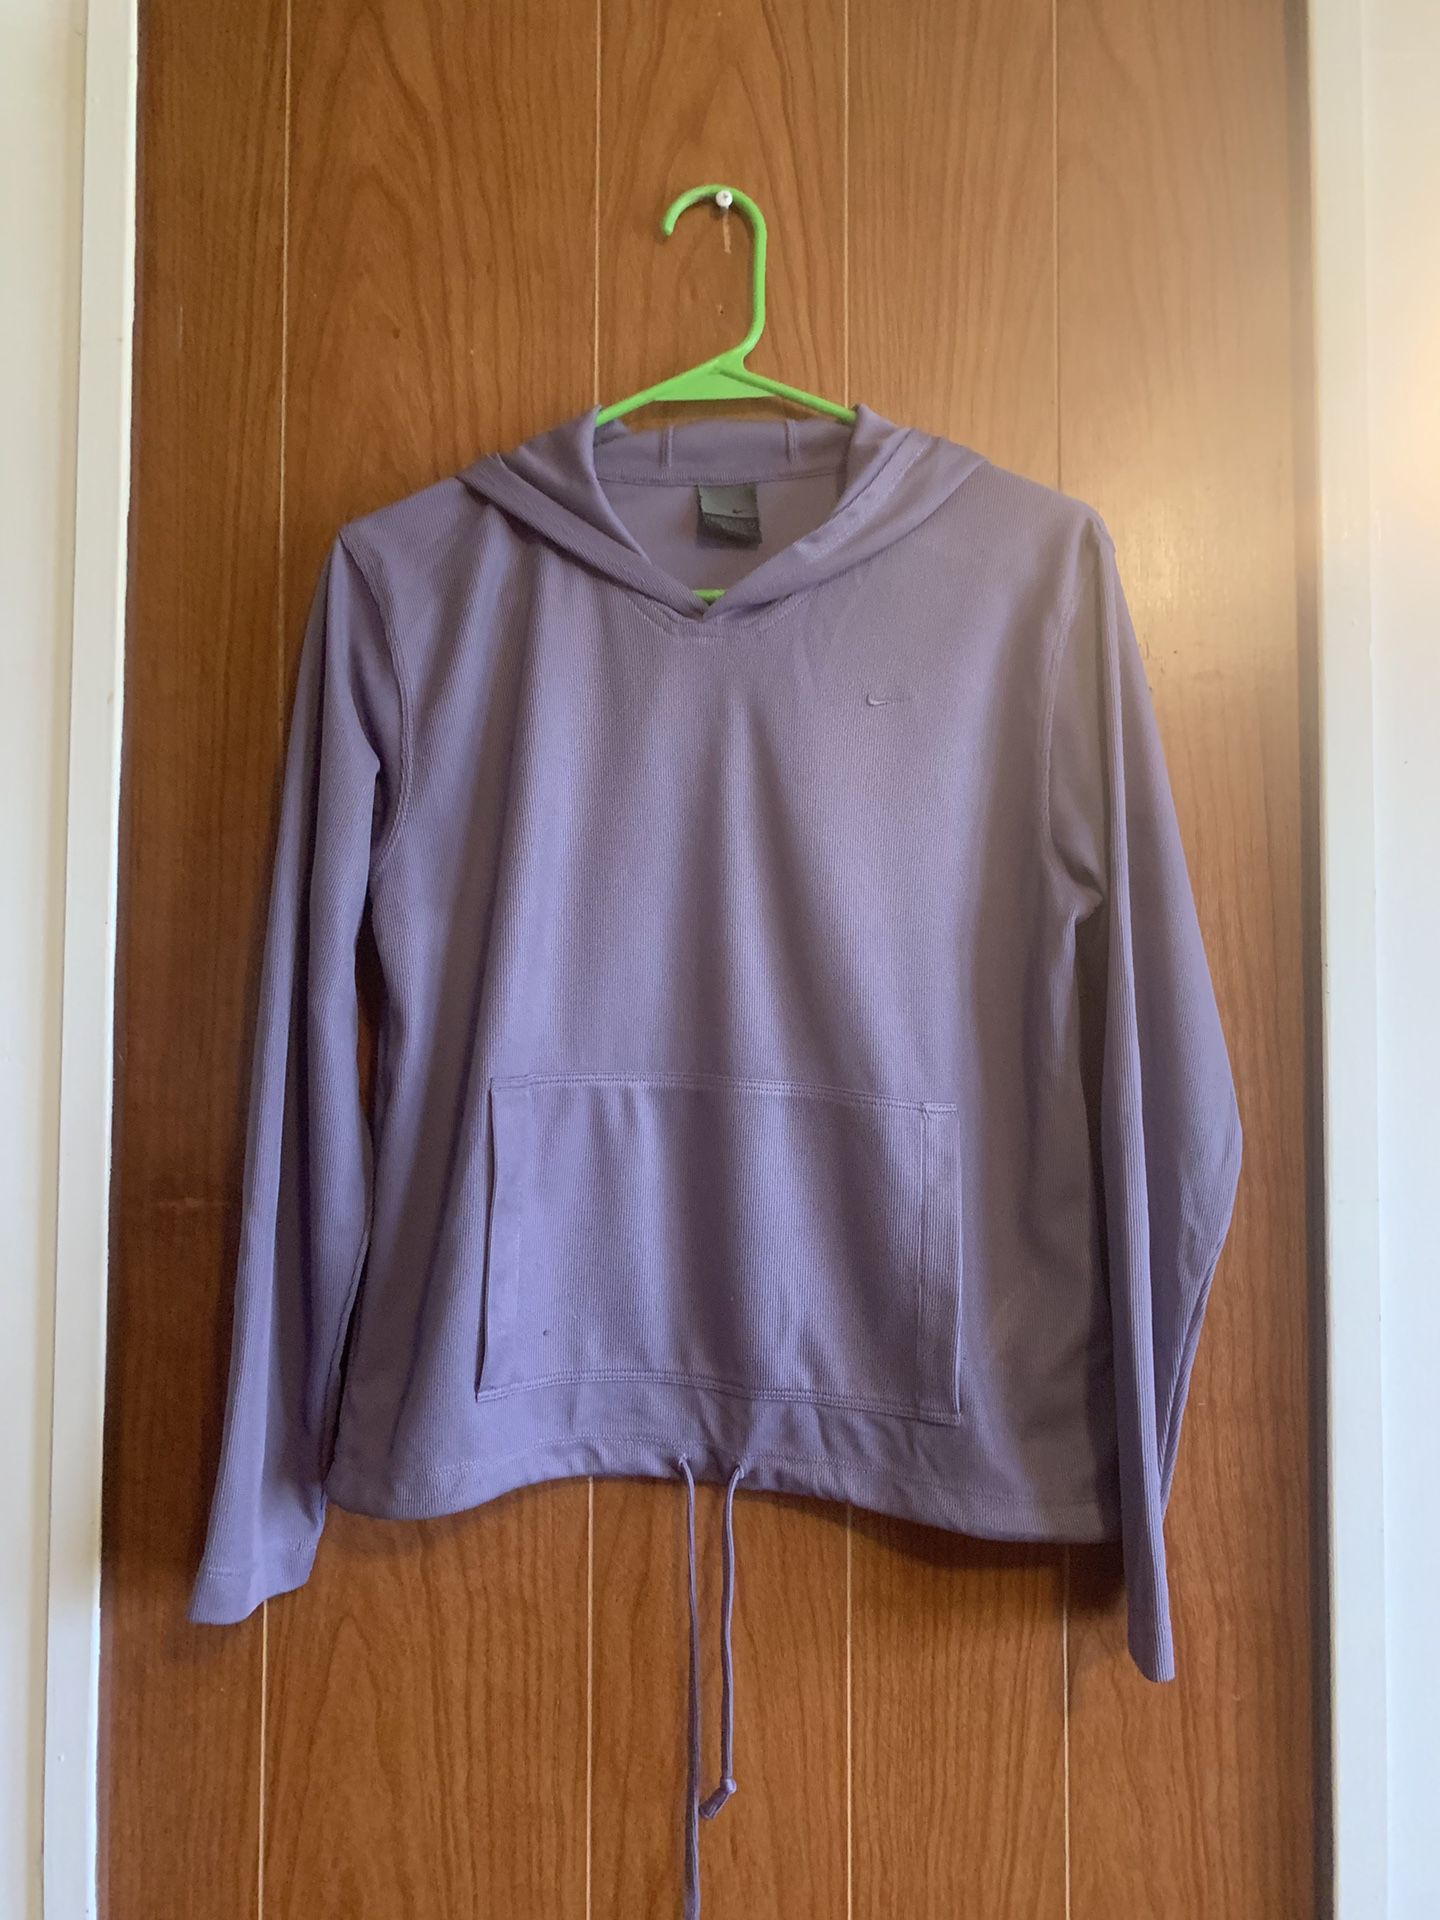 size small nike dry fit light weight hoodie